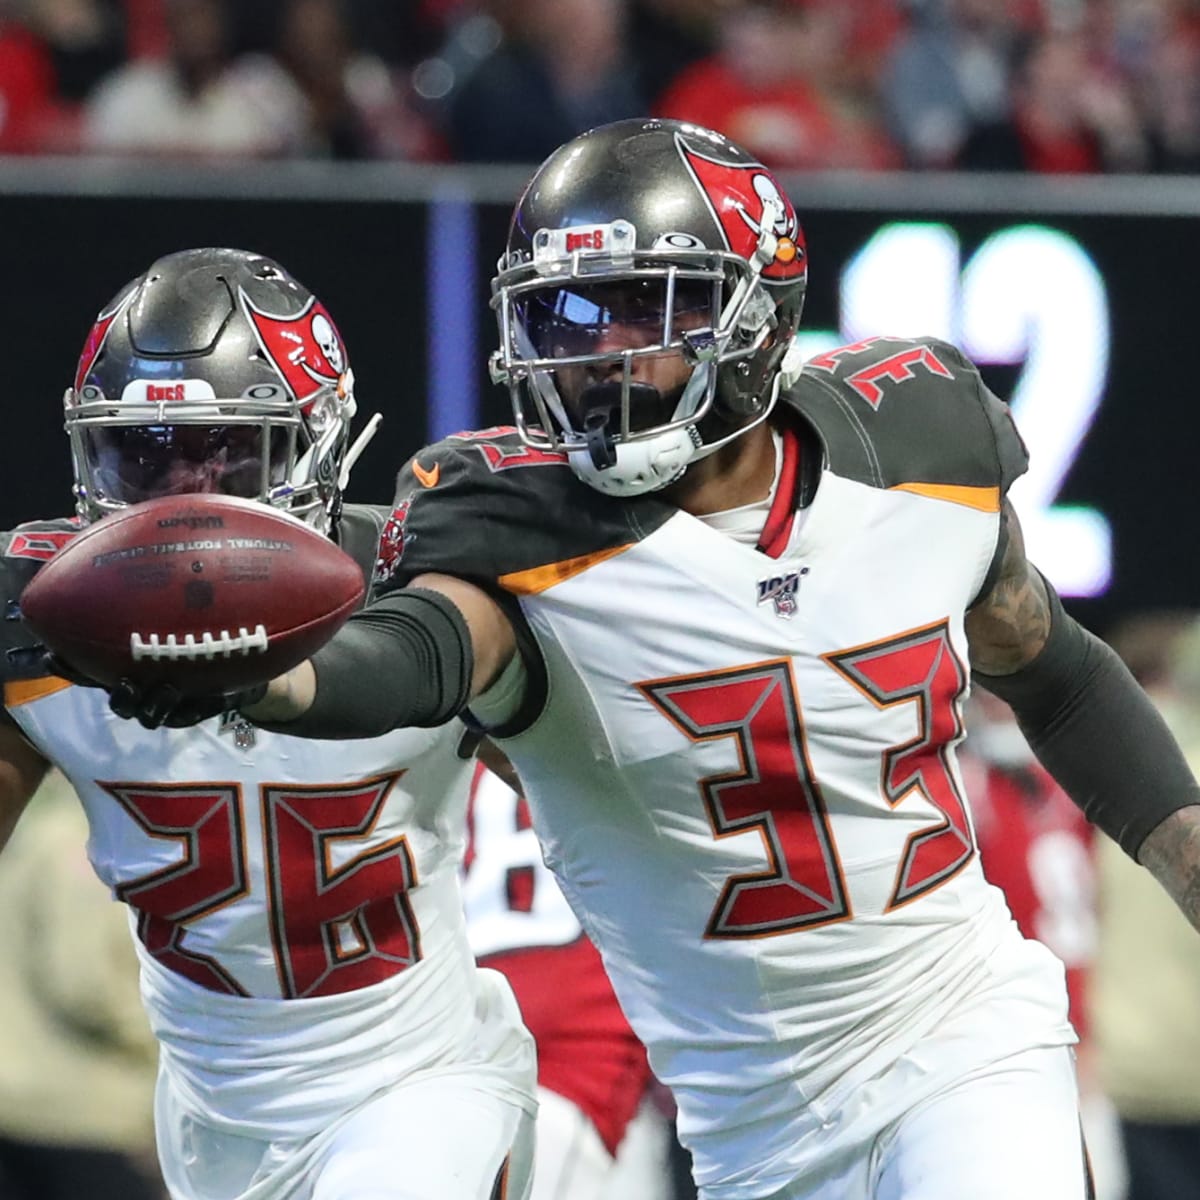 Bucs Players to Change Jersey Numbers - Tampa Bay Buccaneers, BucsGameday